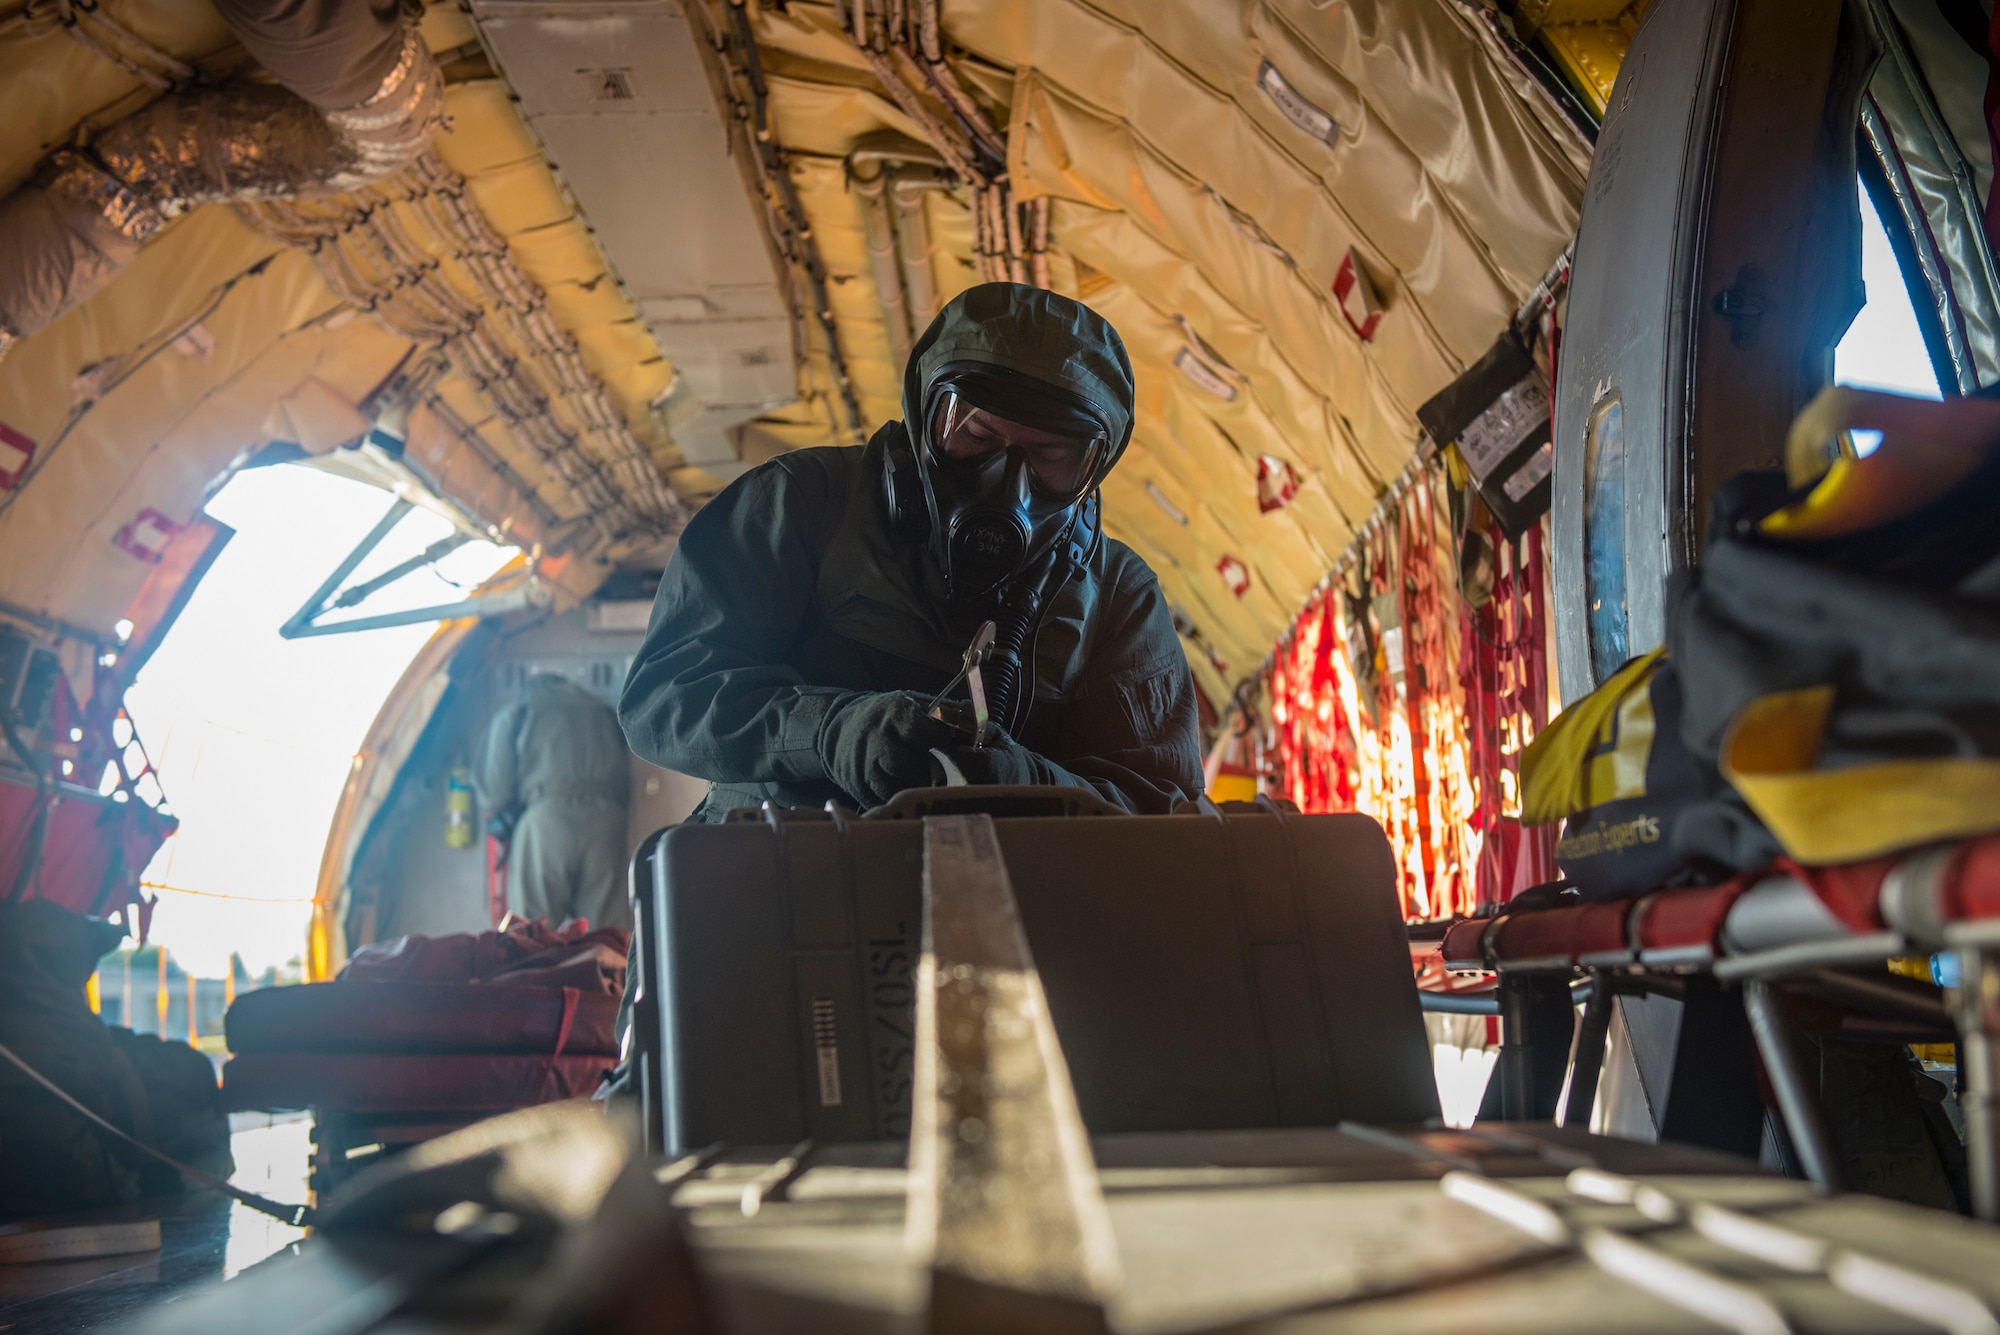 Senior Airman Stetson Vigil, 93rd Air Refueling Squadron boom operator, secures cargo during the first in-field use and test of the new Joint Service Aircrew Mask on a KC-135 Stratotanker at Fairchild Air Force Base, Washington, July 17, 2018. The gear enhances the ability to operate because of the reduced footprint of the gear while still allowing maximum protection. (U.S. Air Force photo/ Airman 1st Class Whitney Laine)